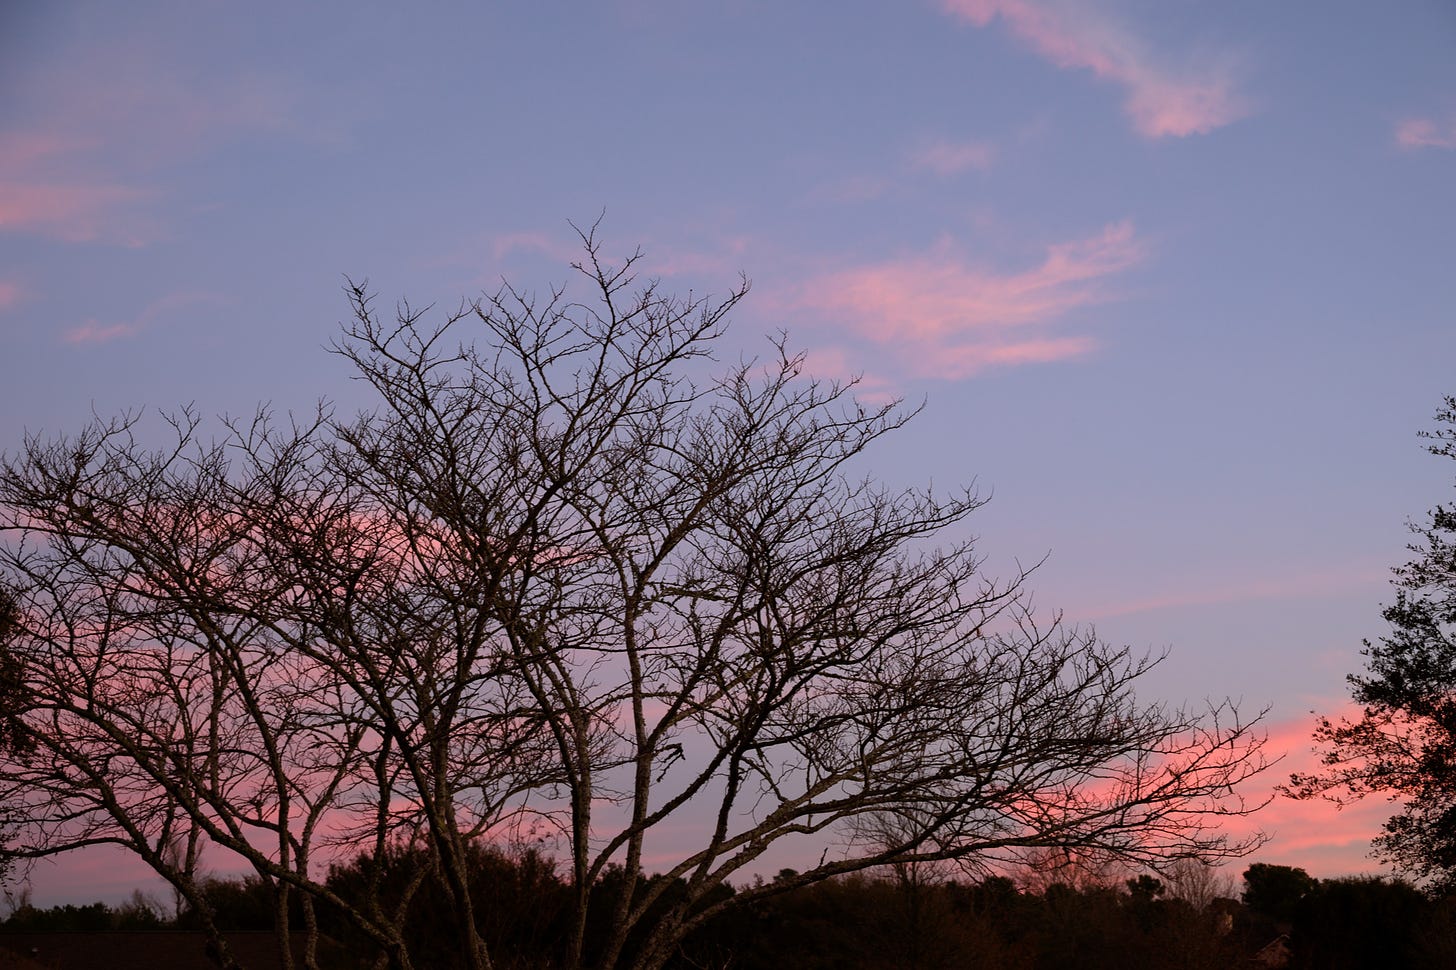 The setting sun casts a pink reflection on the clouds streaking across a pale blue sky. The bare branches of the trees reach upward in the foreground